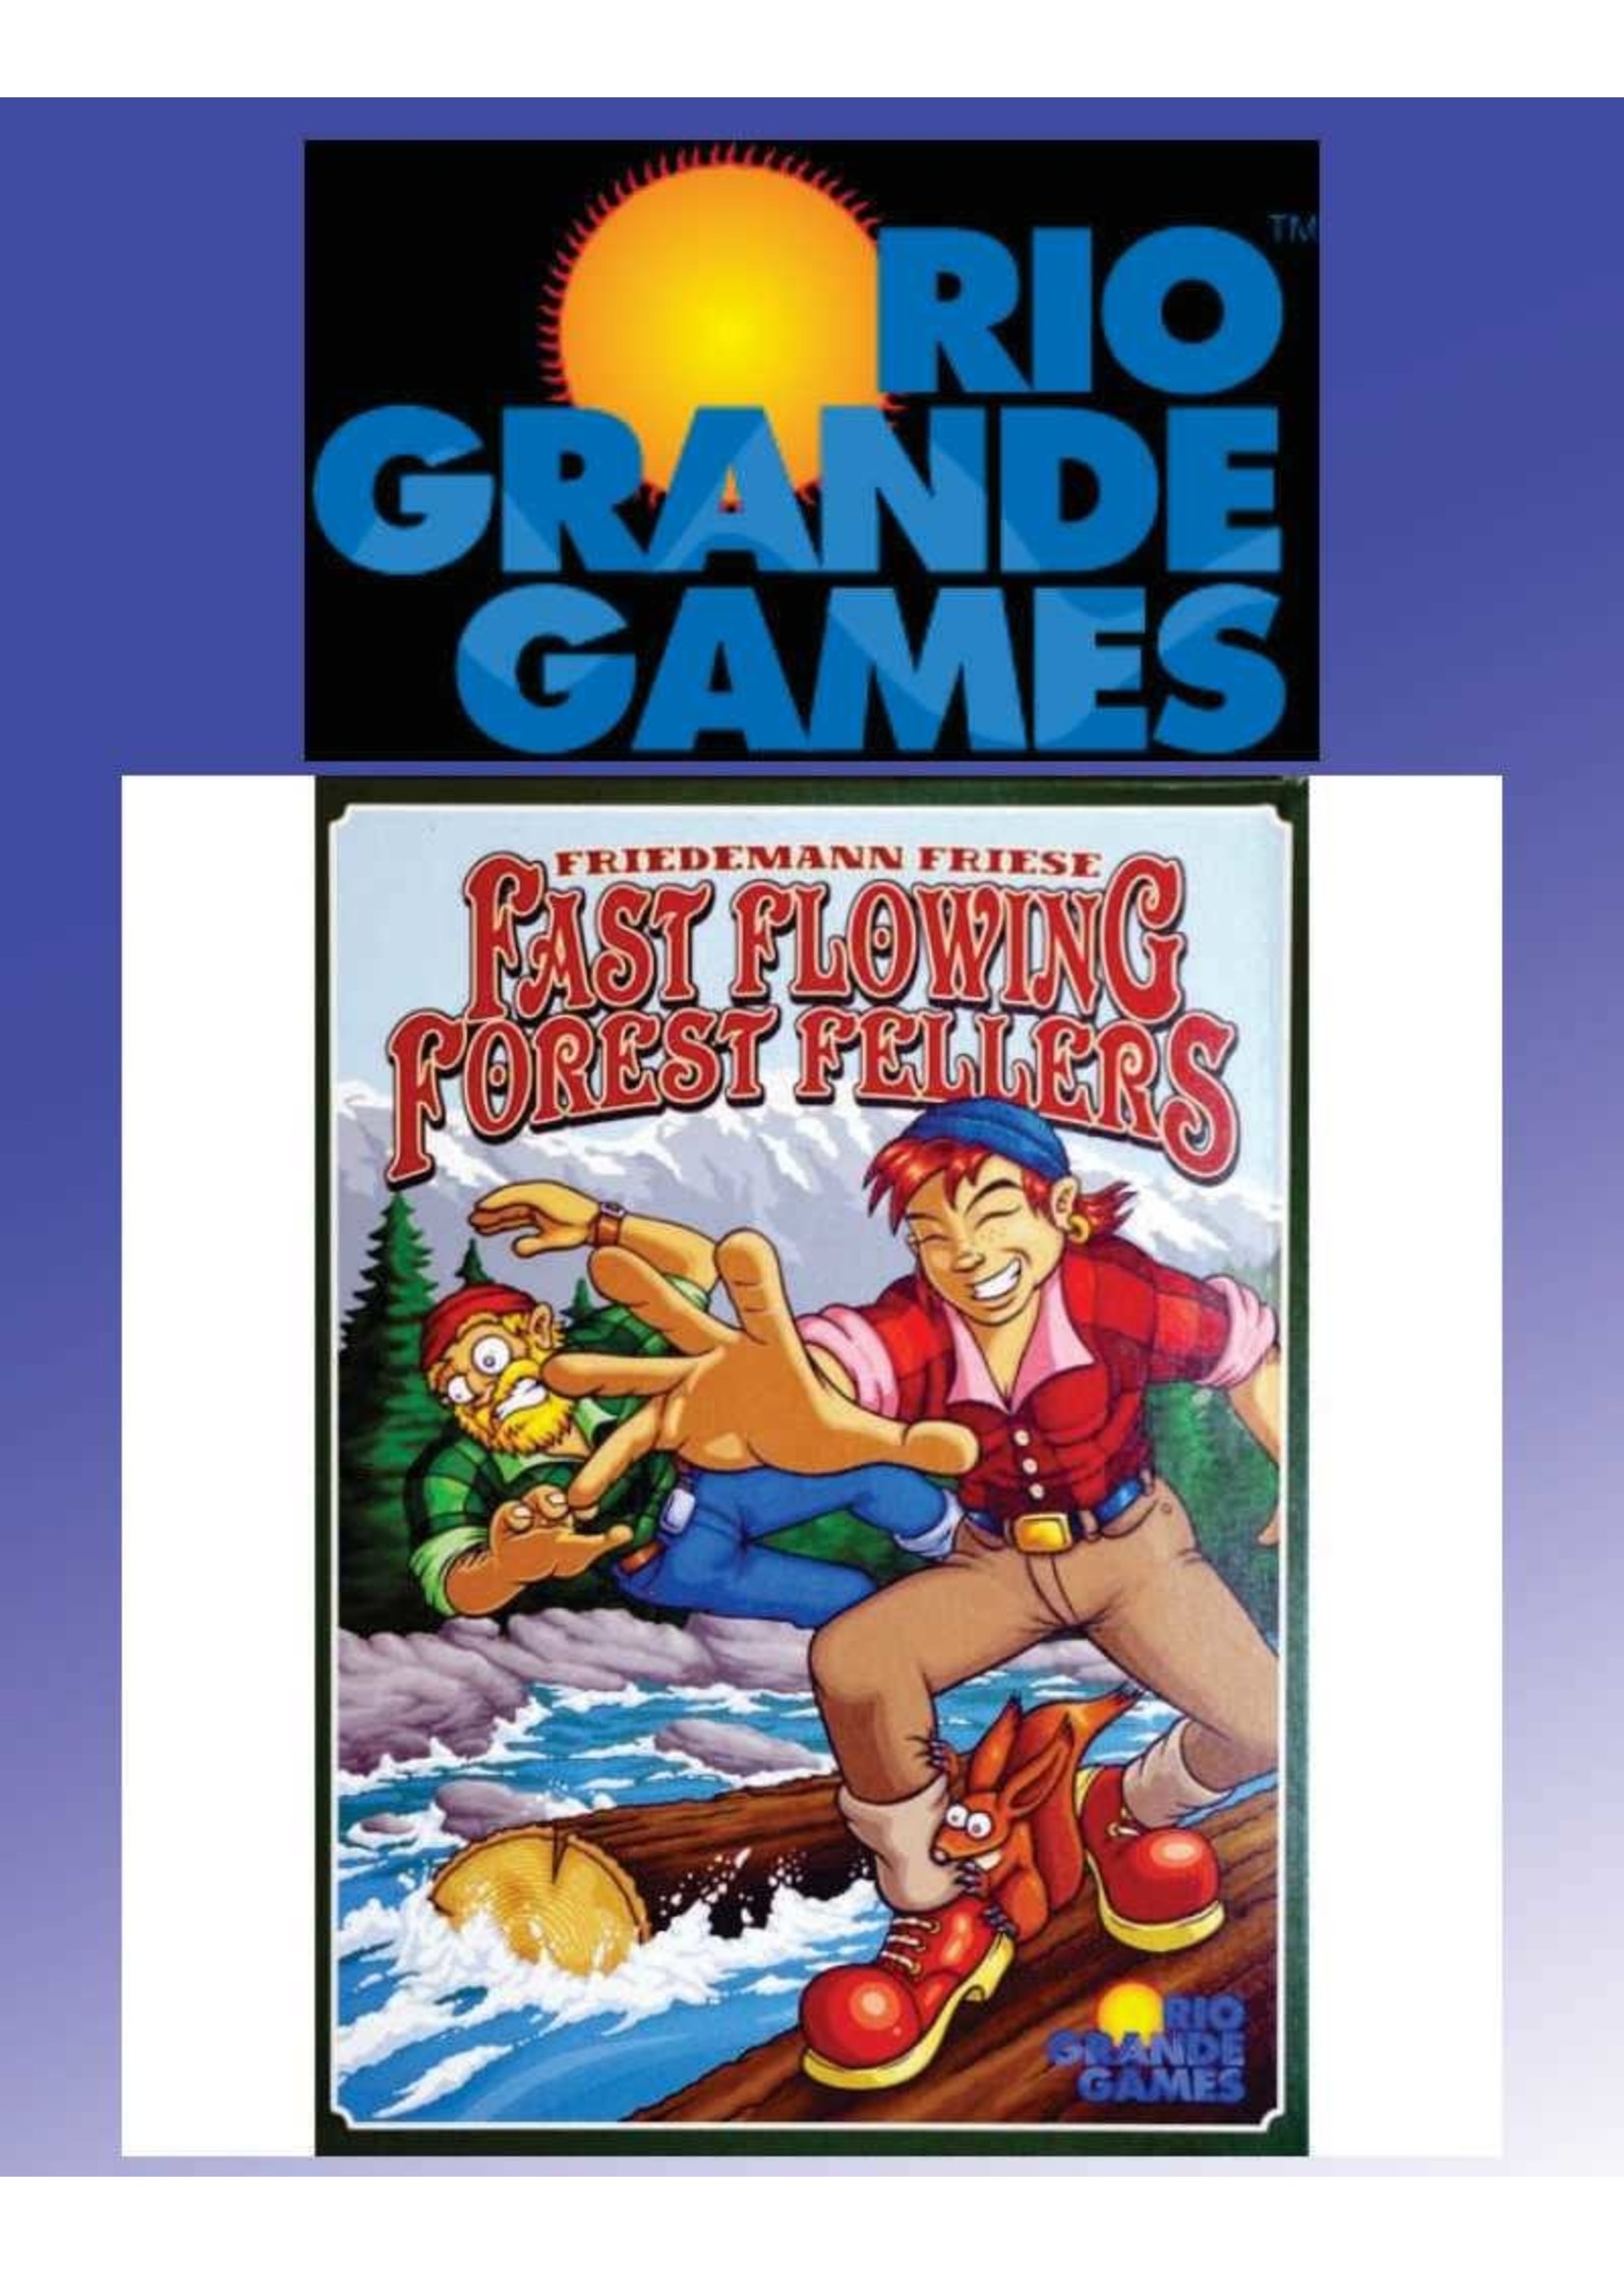 Rio Grande Games Fast Flowing Forest Fellers